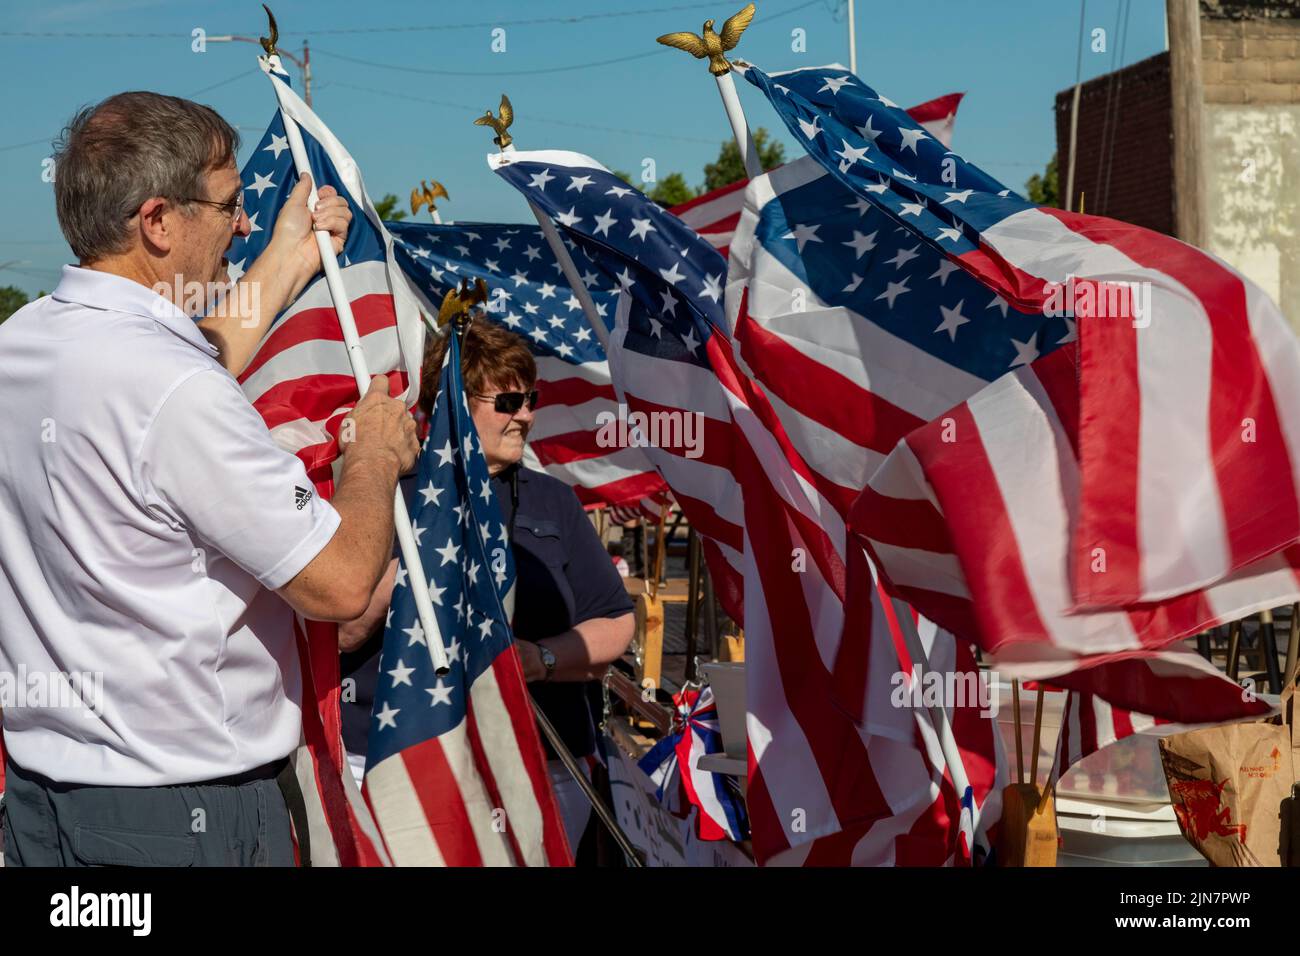 Hutchinson, Kansas - People decorate the Hutchinson Municipal Band's float for the annual July 4 'Patriots Parade' in rural Kansas. Stock Photo